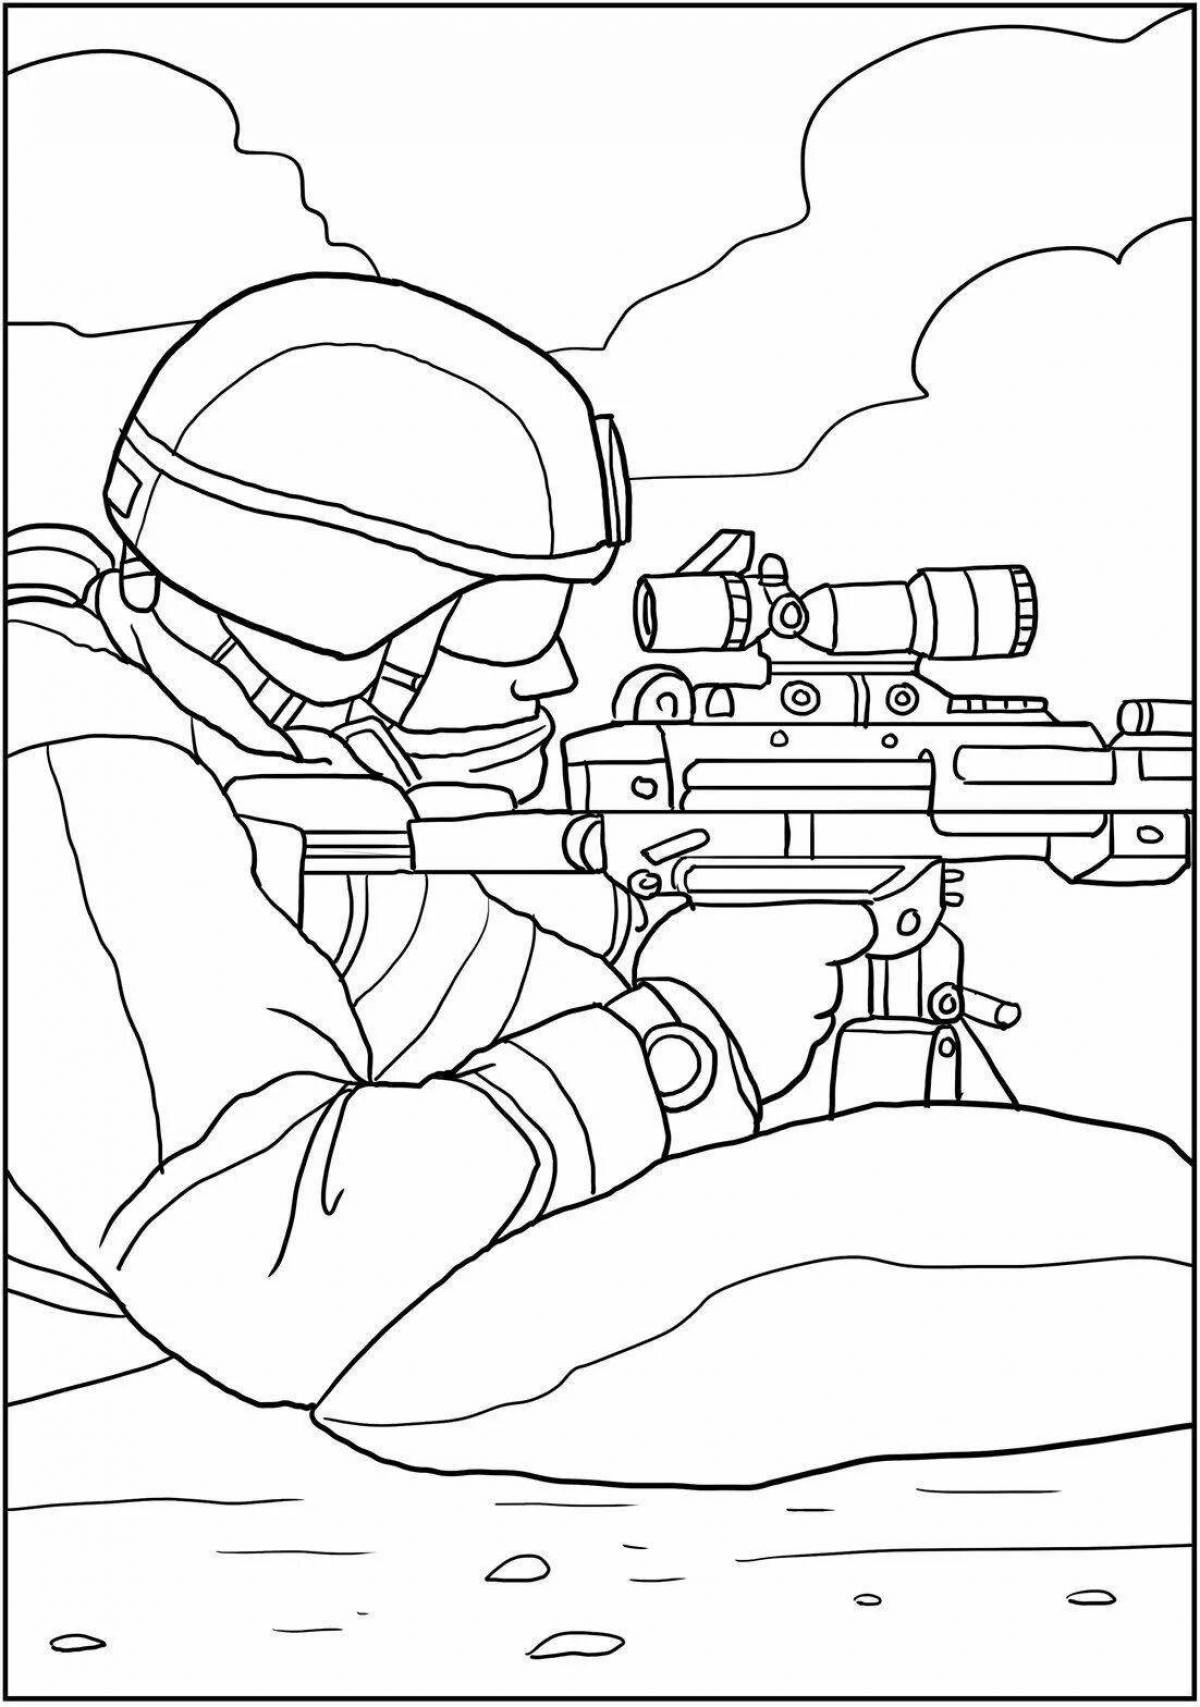 Strikingly realistic military light coloring pages